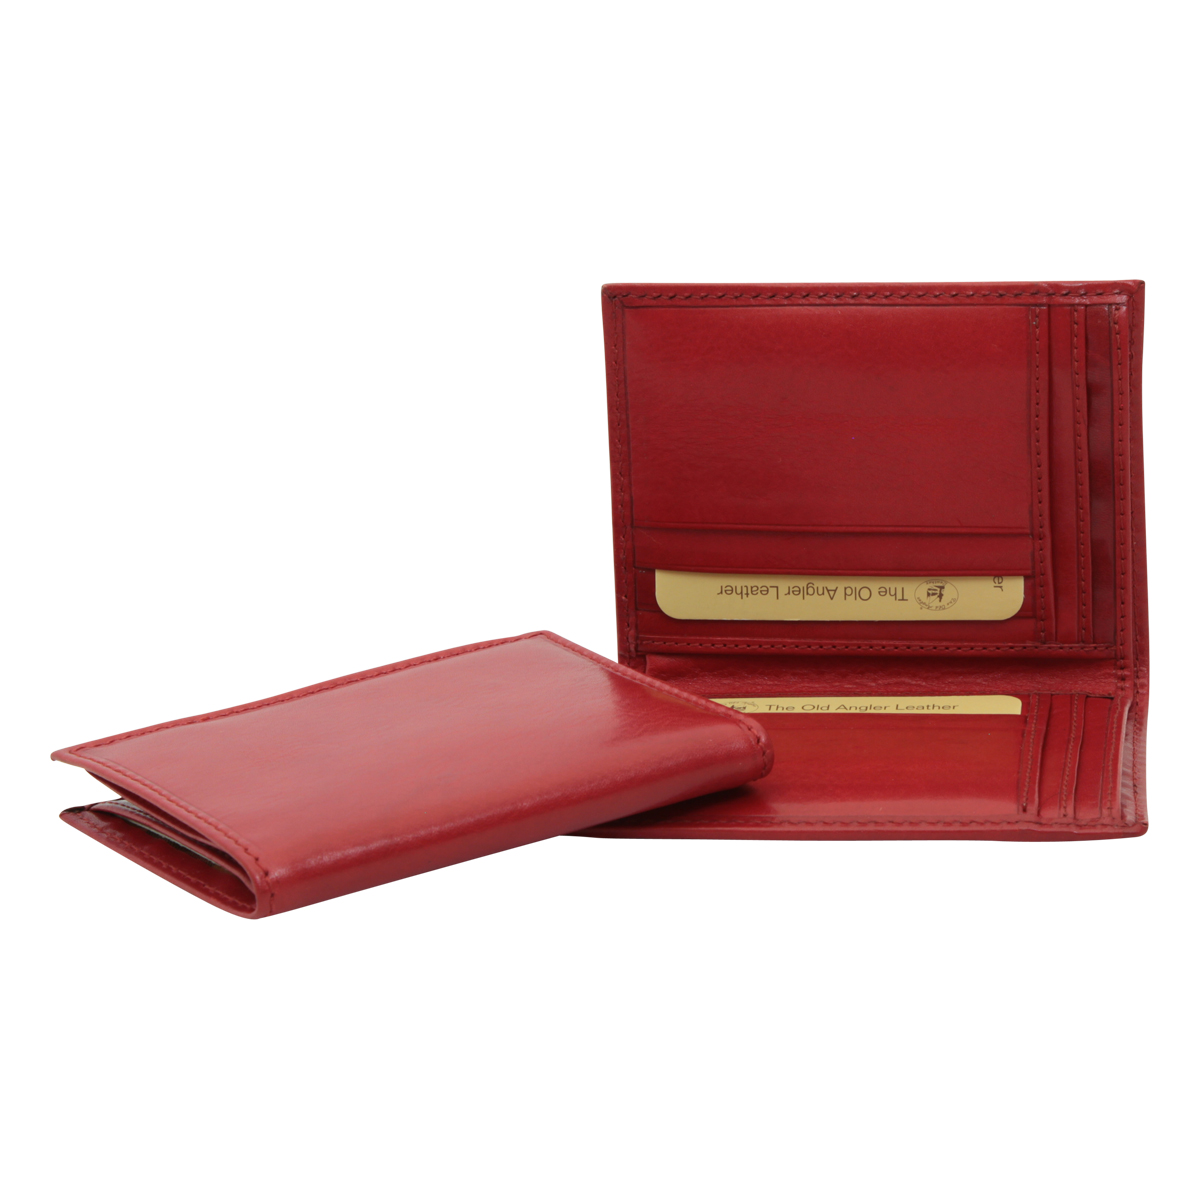 Leather wallet - red|500689RO|Old Angler Firenze